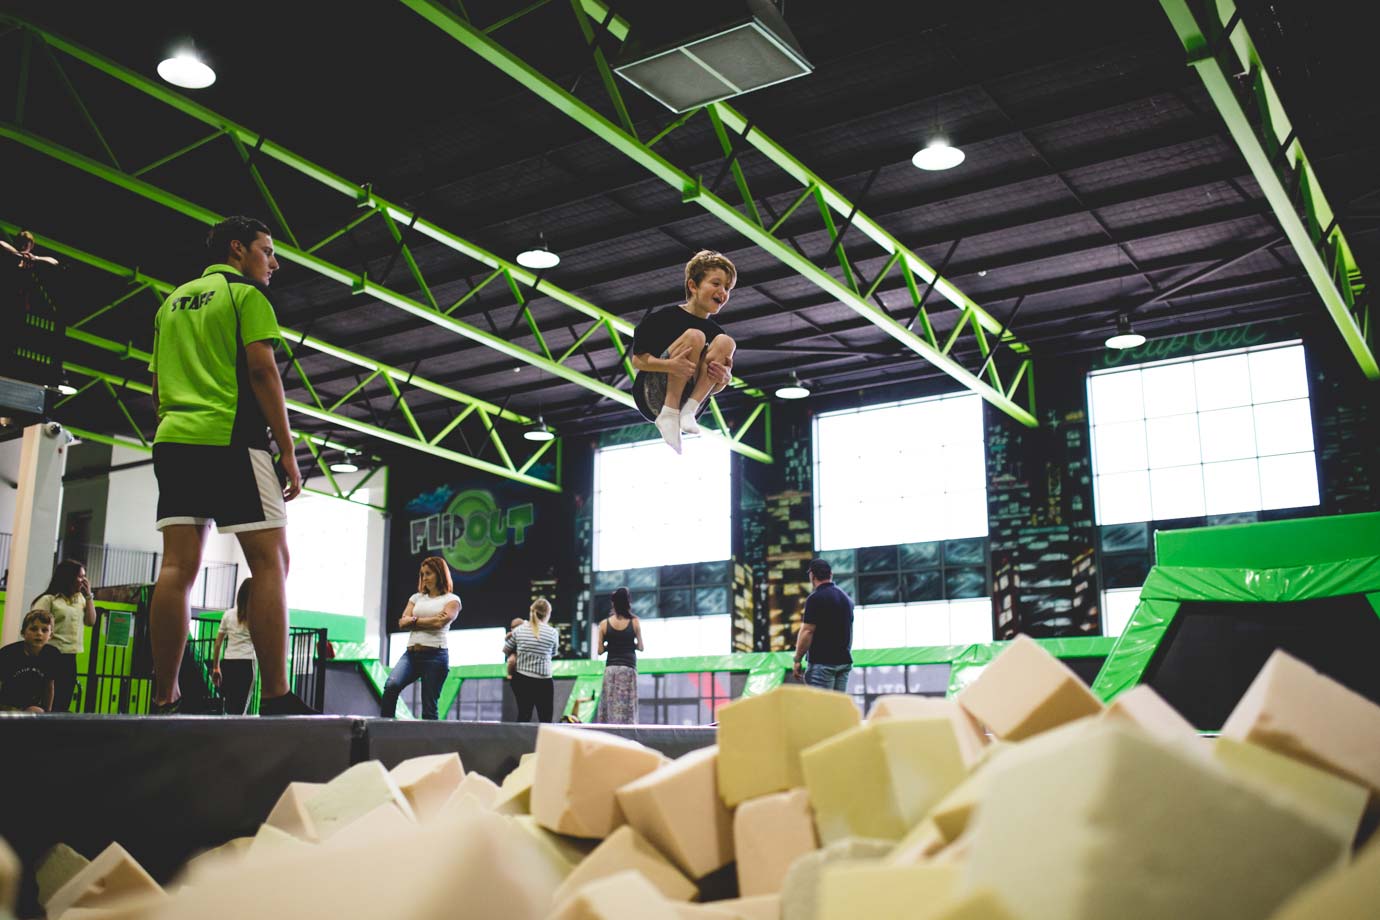 download flipout opening times